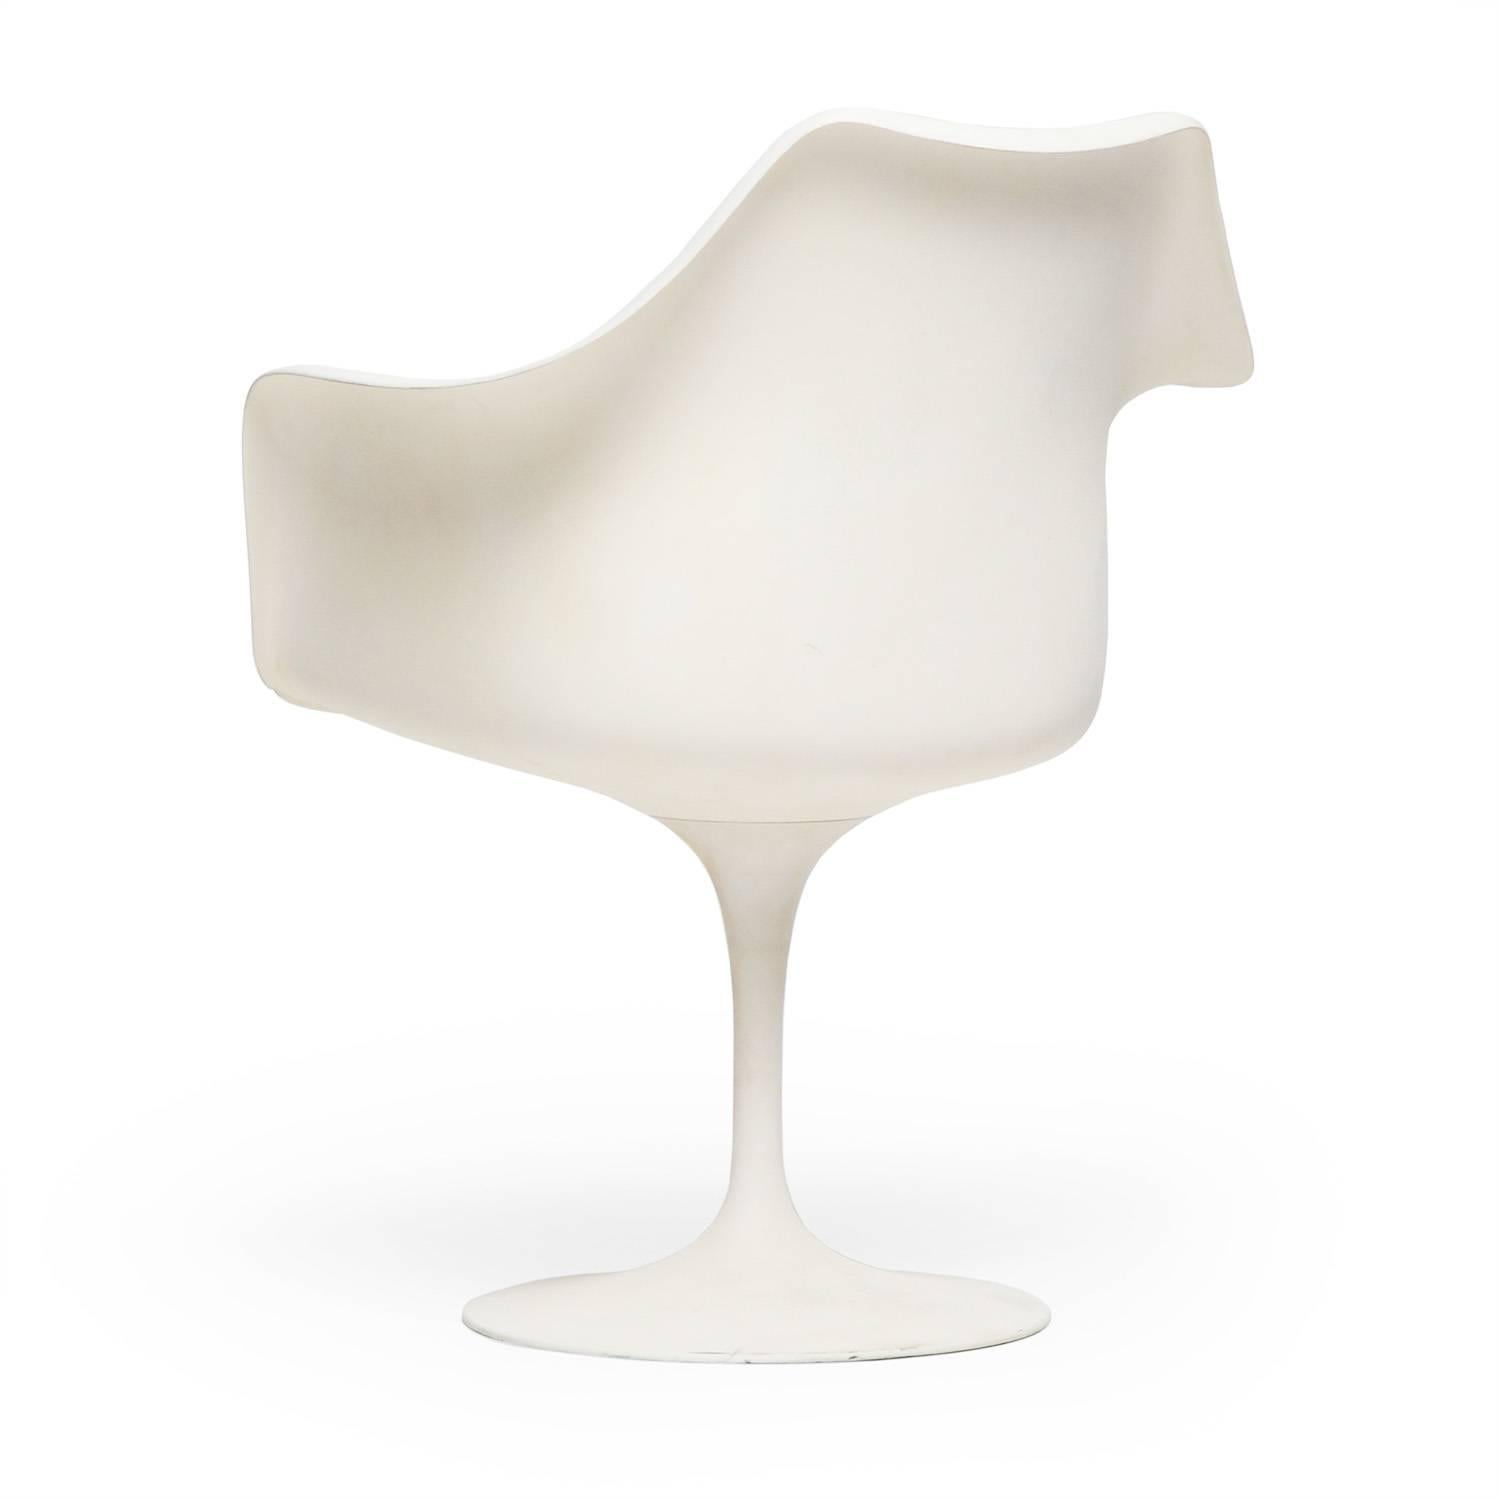 eight tulip' side chairs from the pedestal' collection price